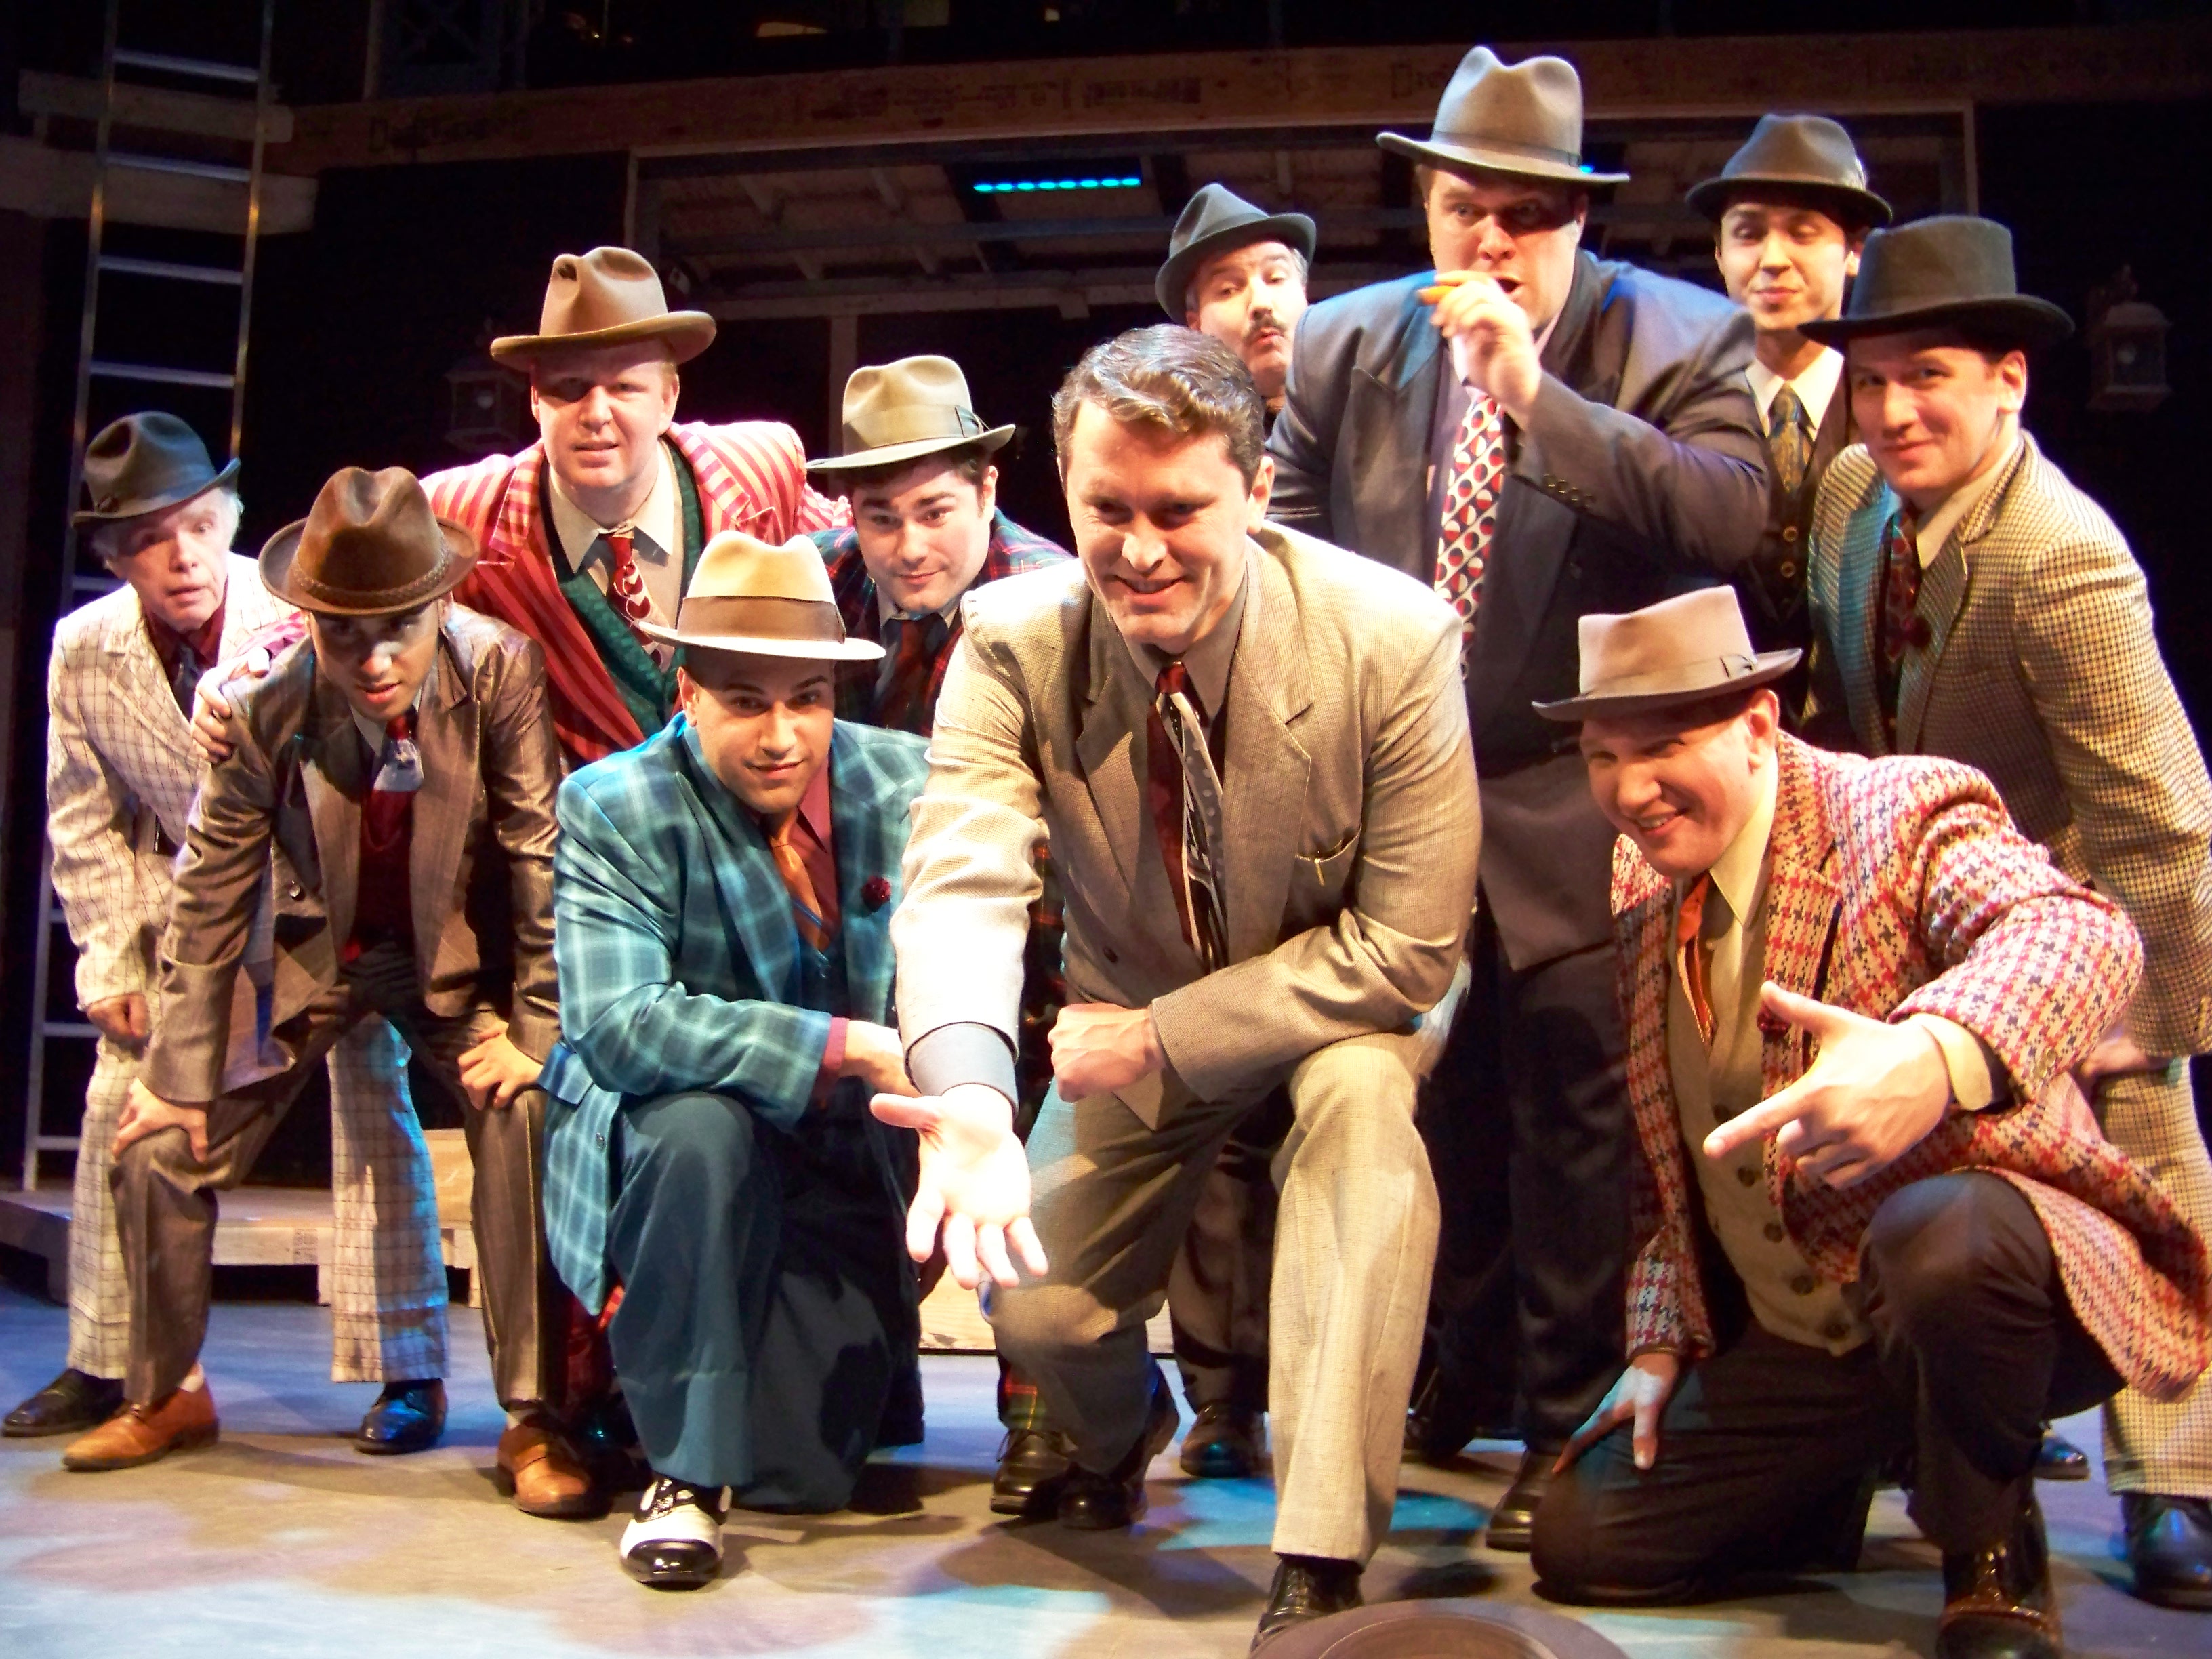 Pick of the Day 5/21: Guys and Dolls at the Majestic